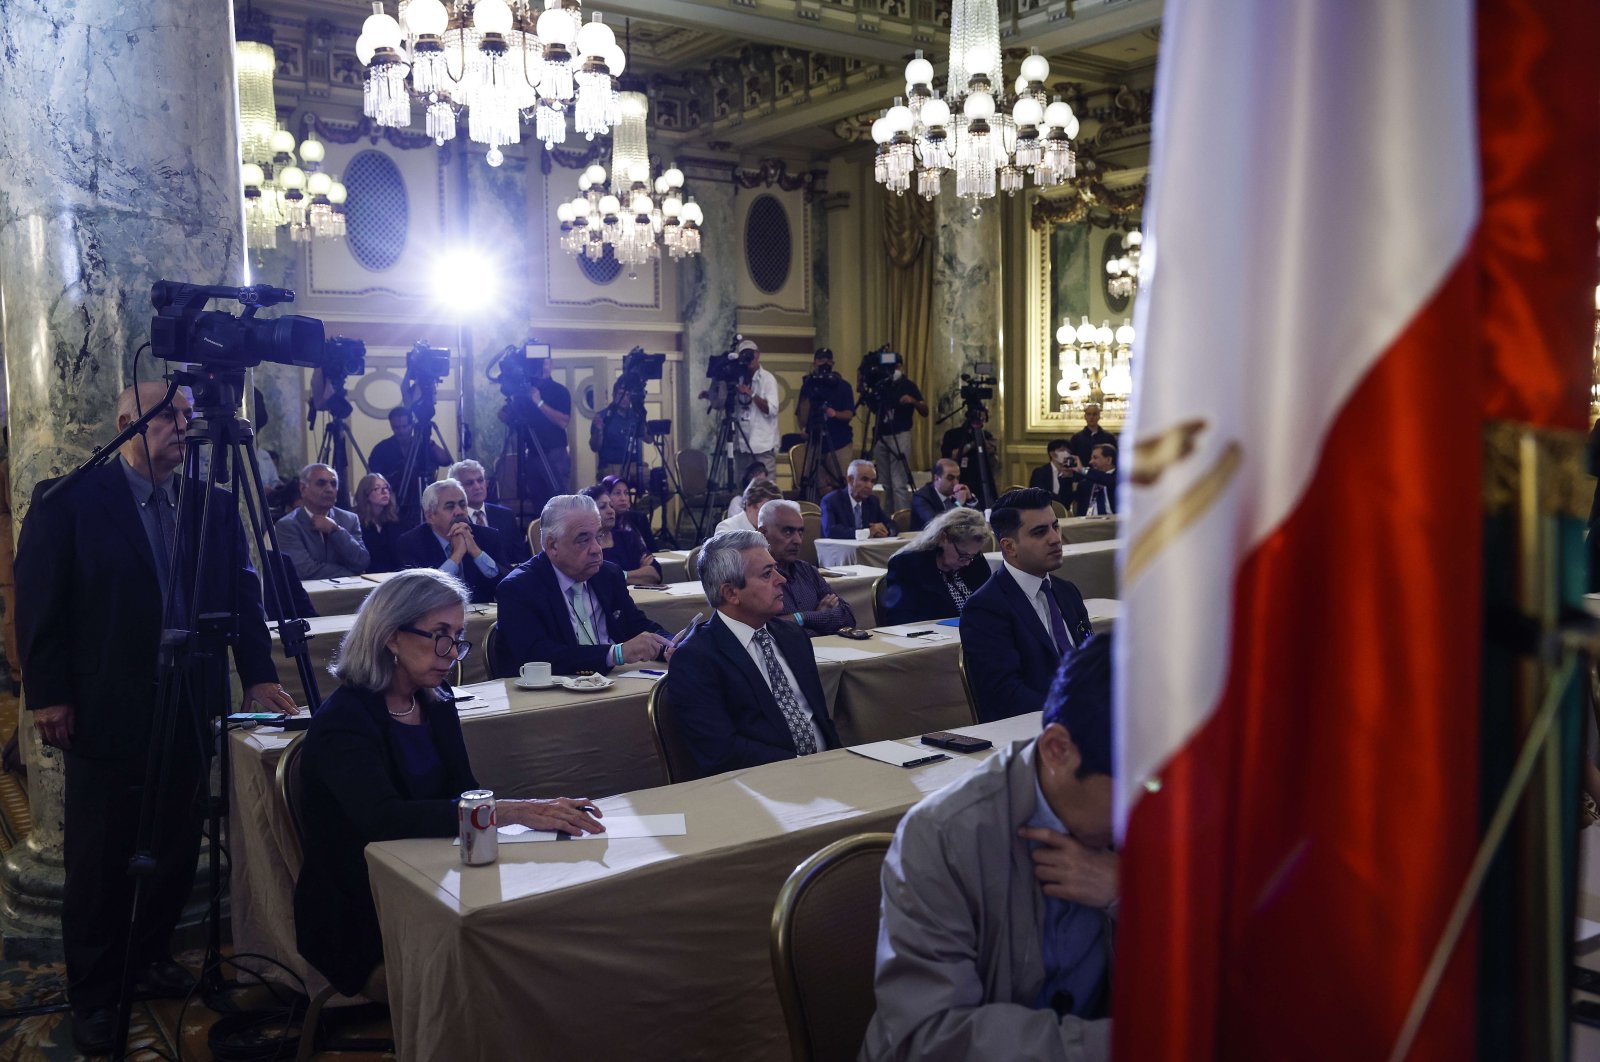 Journalists and guests listen during a panel hosted by the National Council of Resistance of Iran – U.S. Representative Office (NCRI-US) at the Willard InterContinental Hotel, in Washington, DC, U.S., Aug. 17, 2022. (AFP Photo)